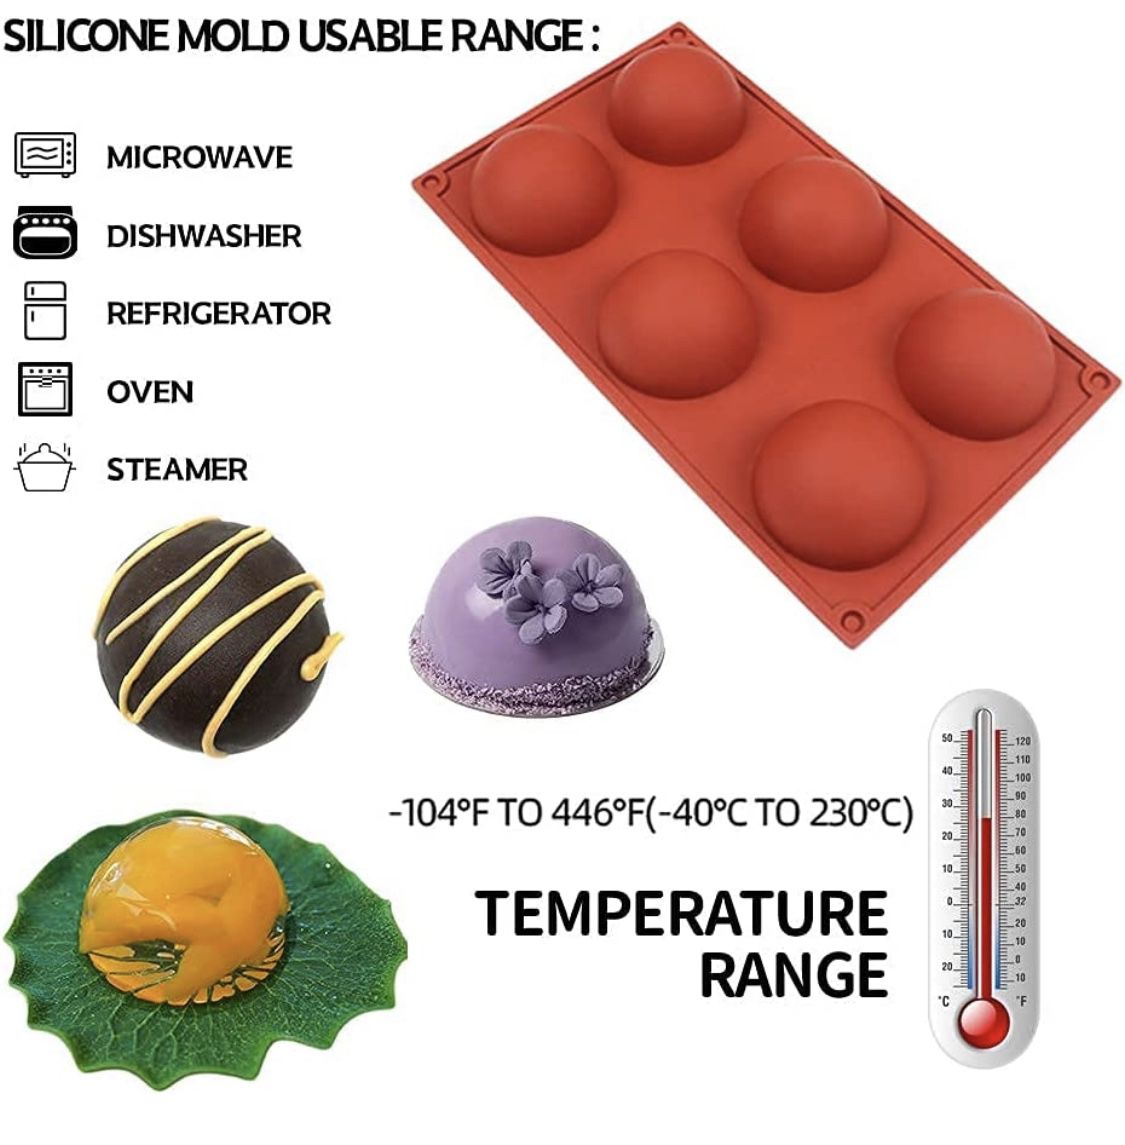 Silicone Food Molds 6pcs For $5